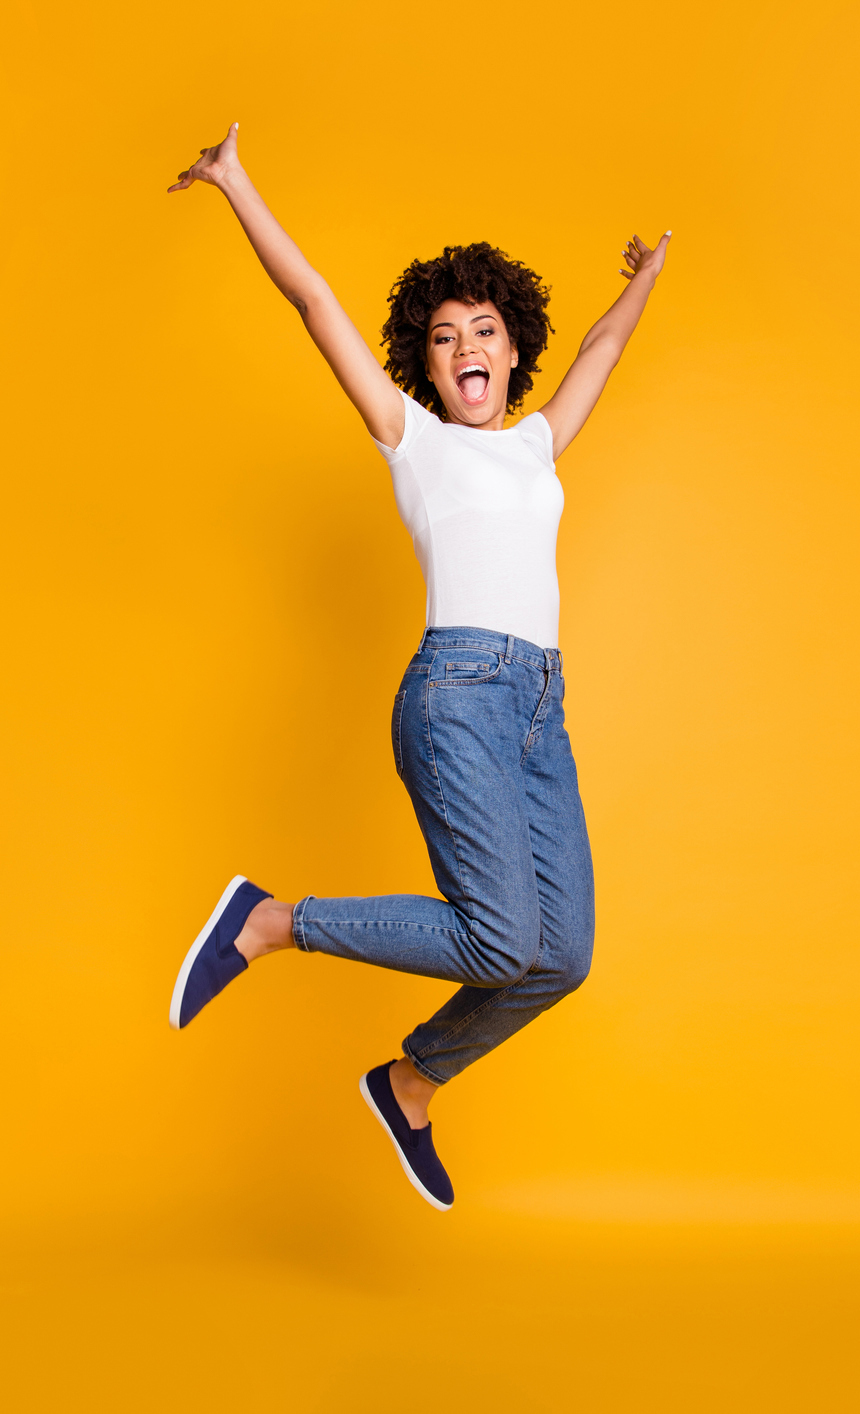 Woman "jumping for joy" on a bright yellow background